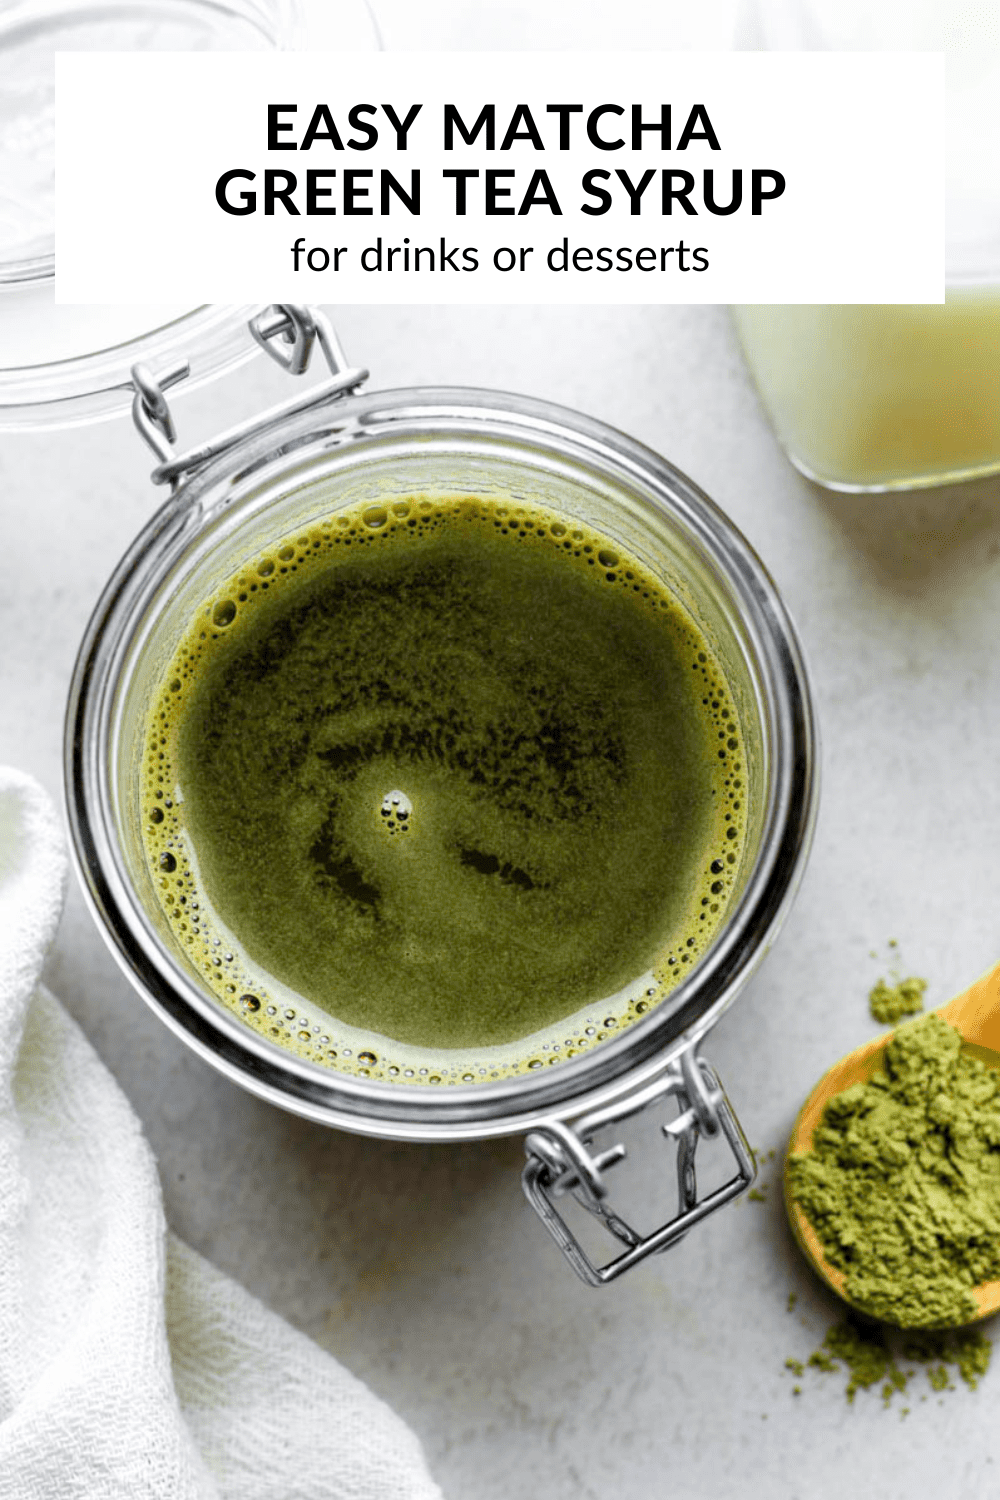 A photo of matcha syrup with text overlay "Easy matcha simple syrup".